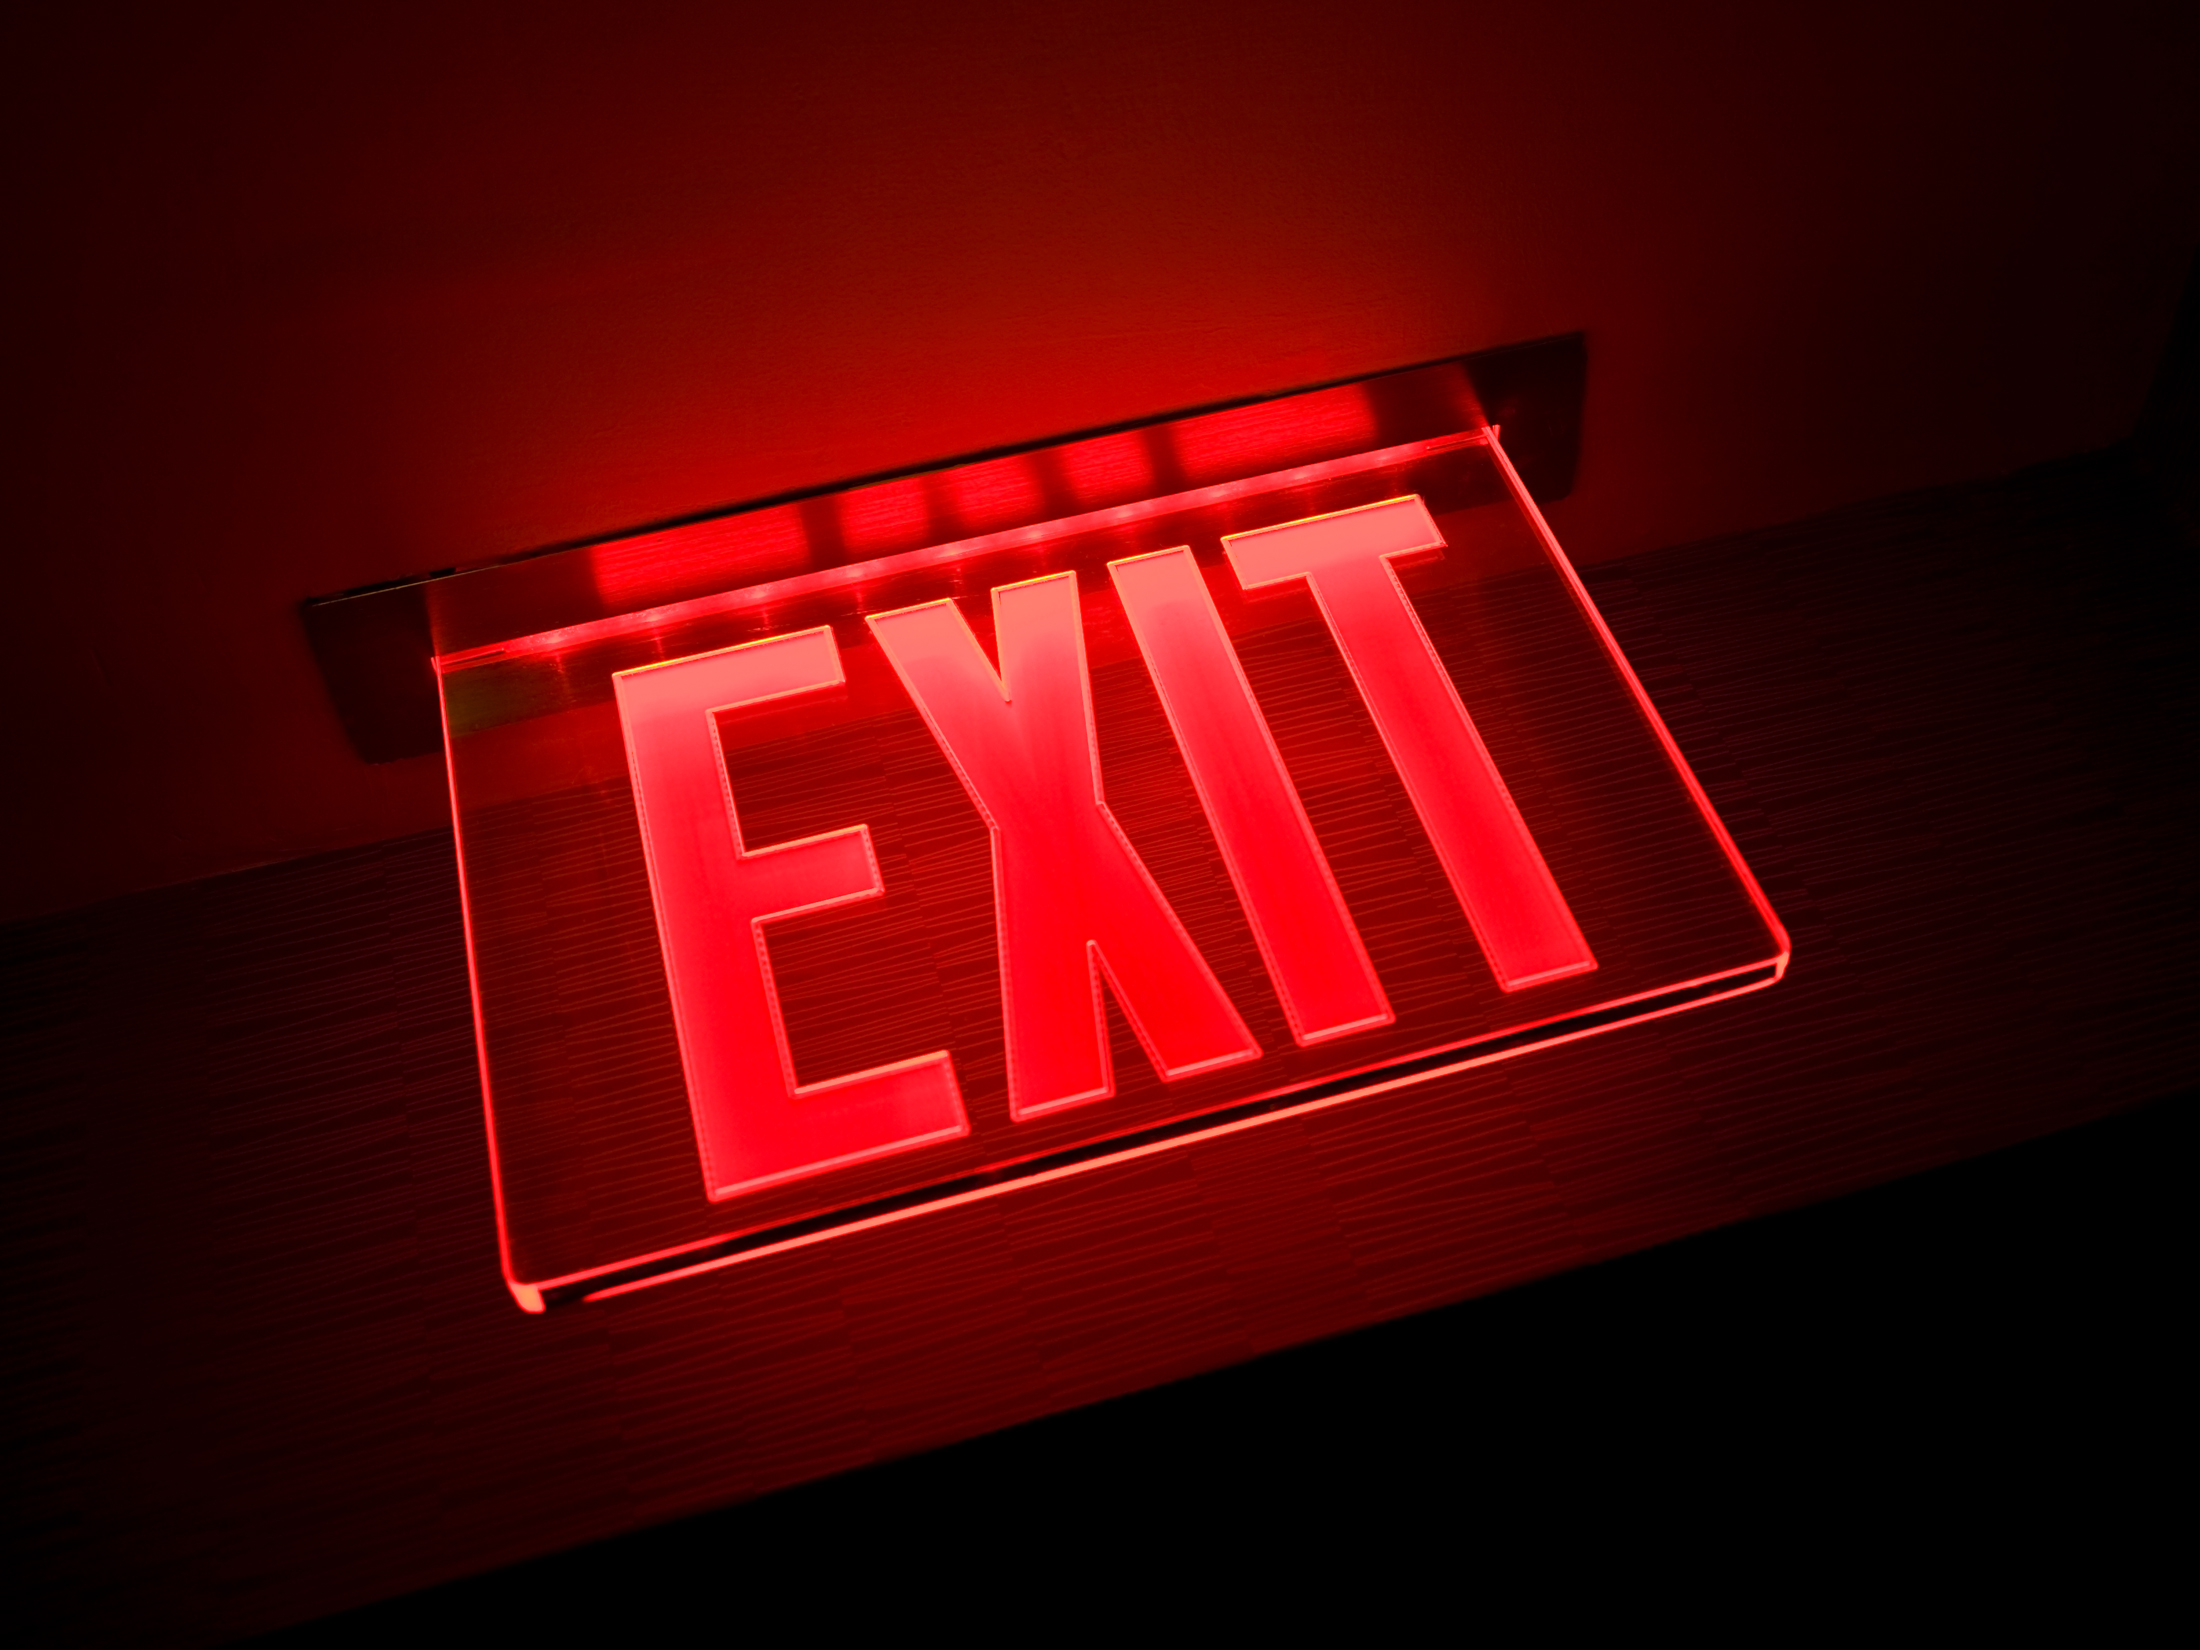 Exit sign illuminated, close-up, low angle view